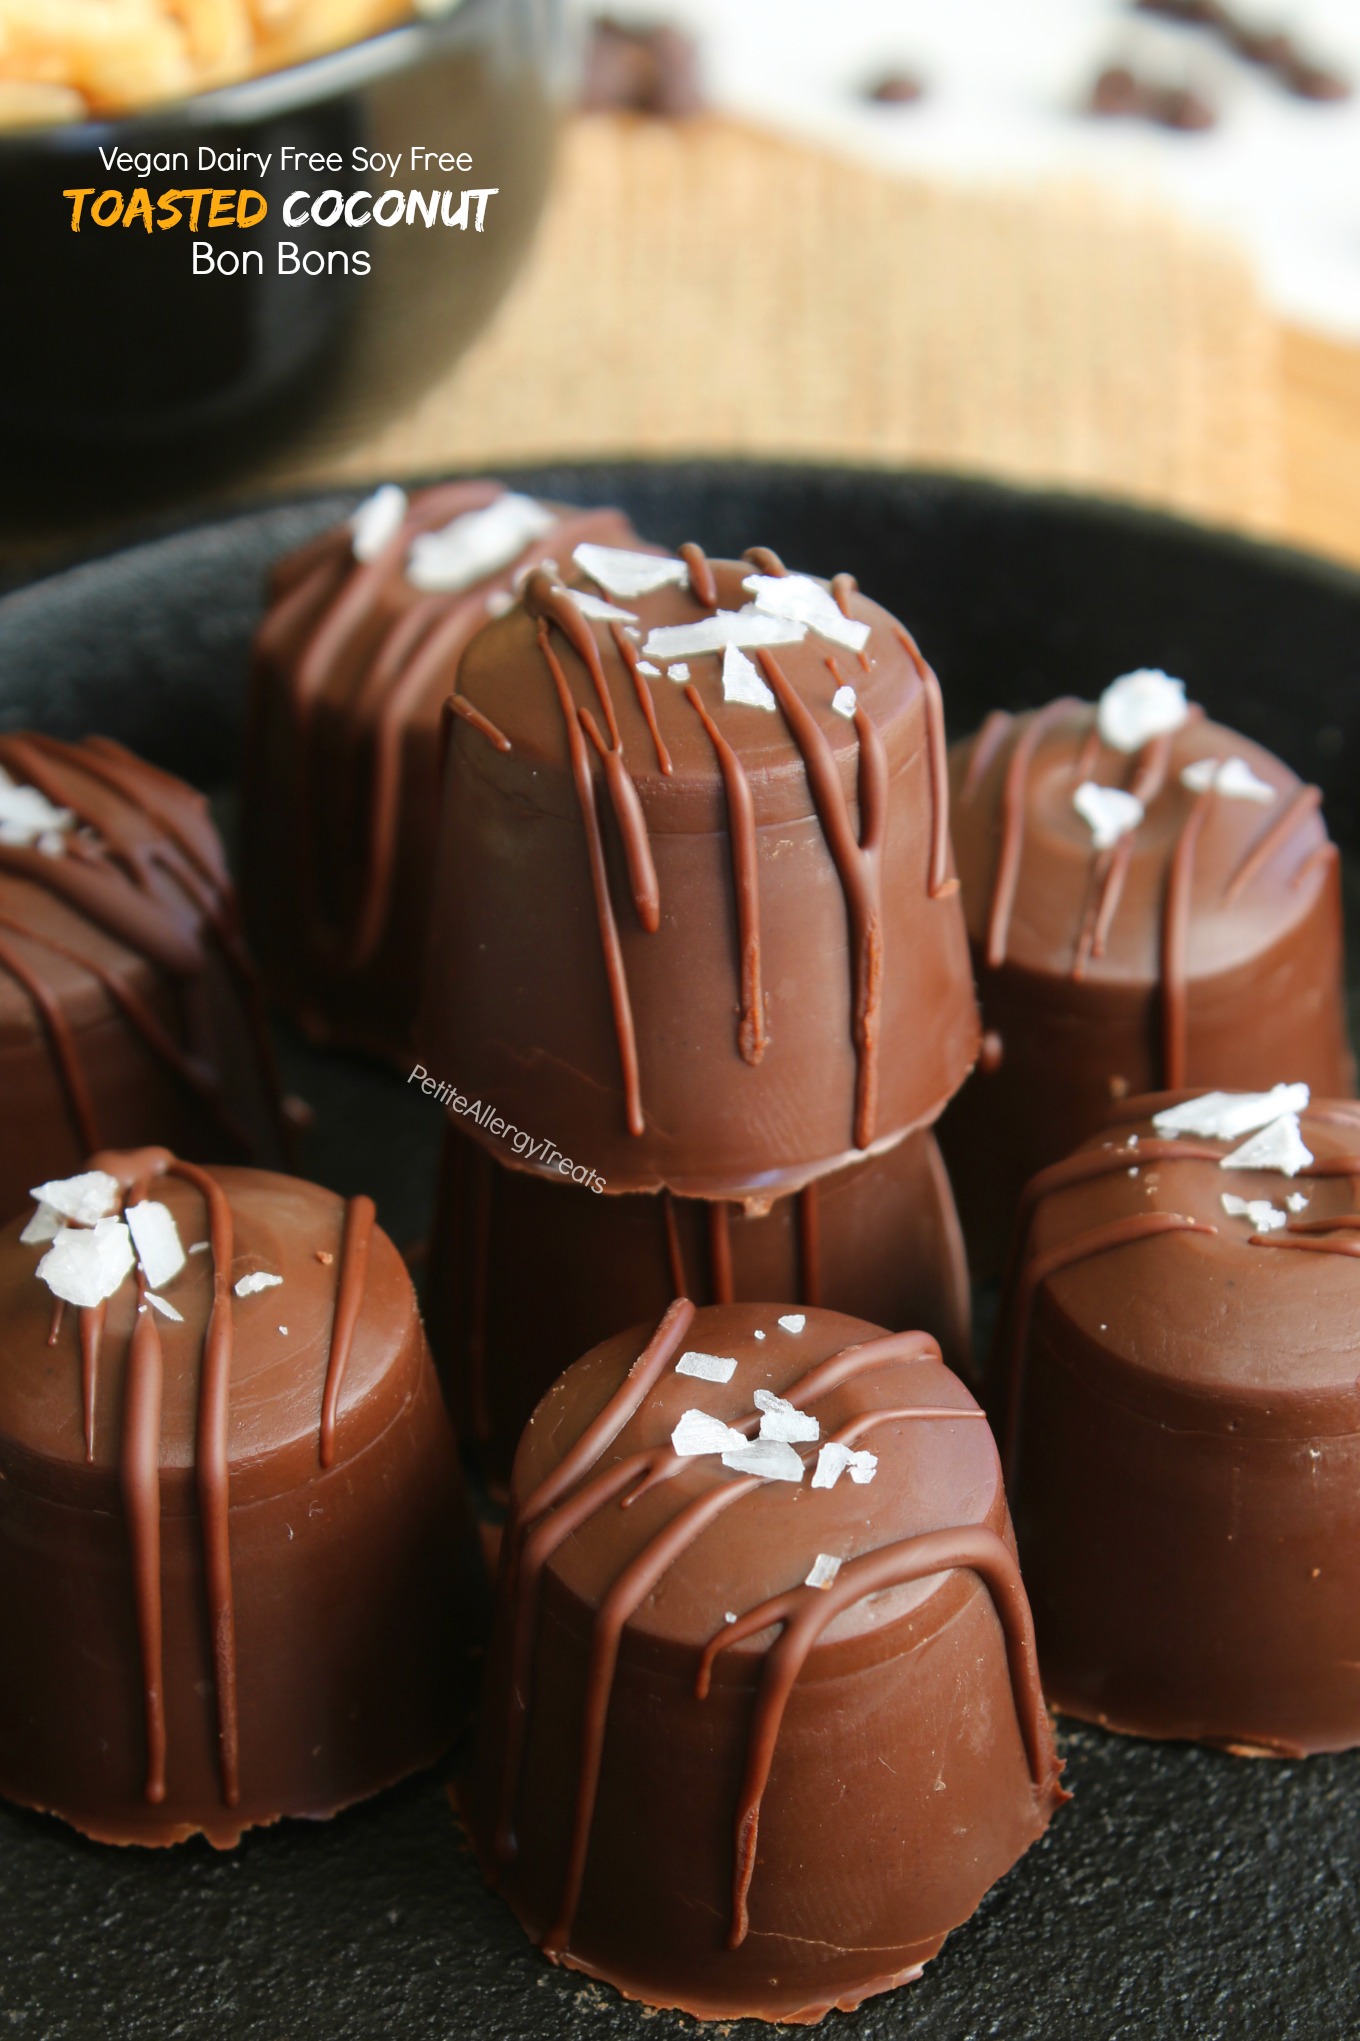 Chocolate Toasted Coconut Bon Bons or Truffles Recipe- Dairy free vegan chocolate make these coconut chocolates food allergy friendly. Perfect for parties!